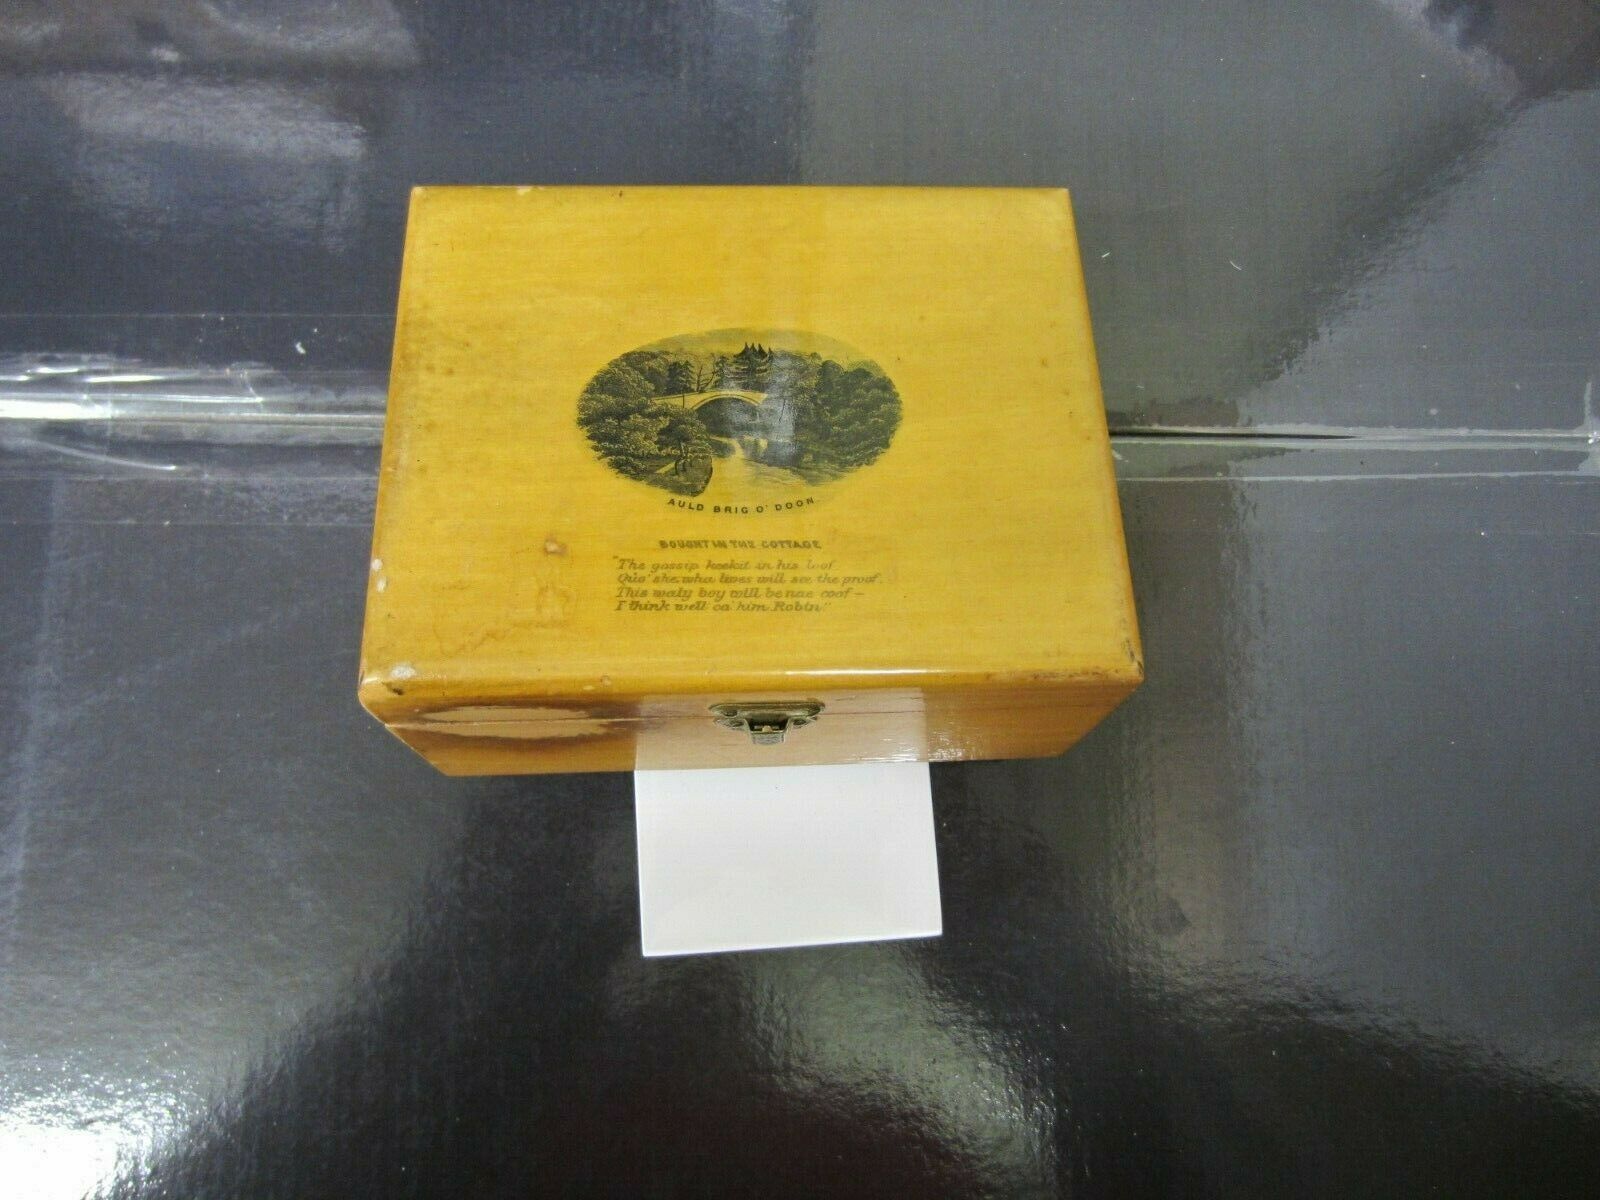 Transfer Ware Box with view of Auld Brig O' Doon Mauchline Ware